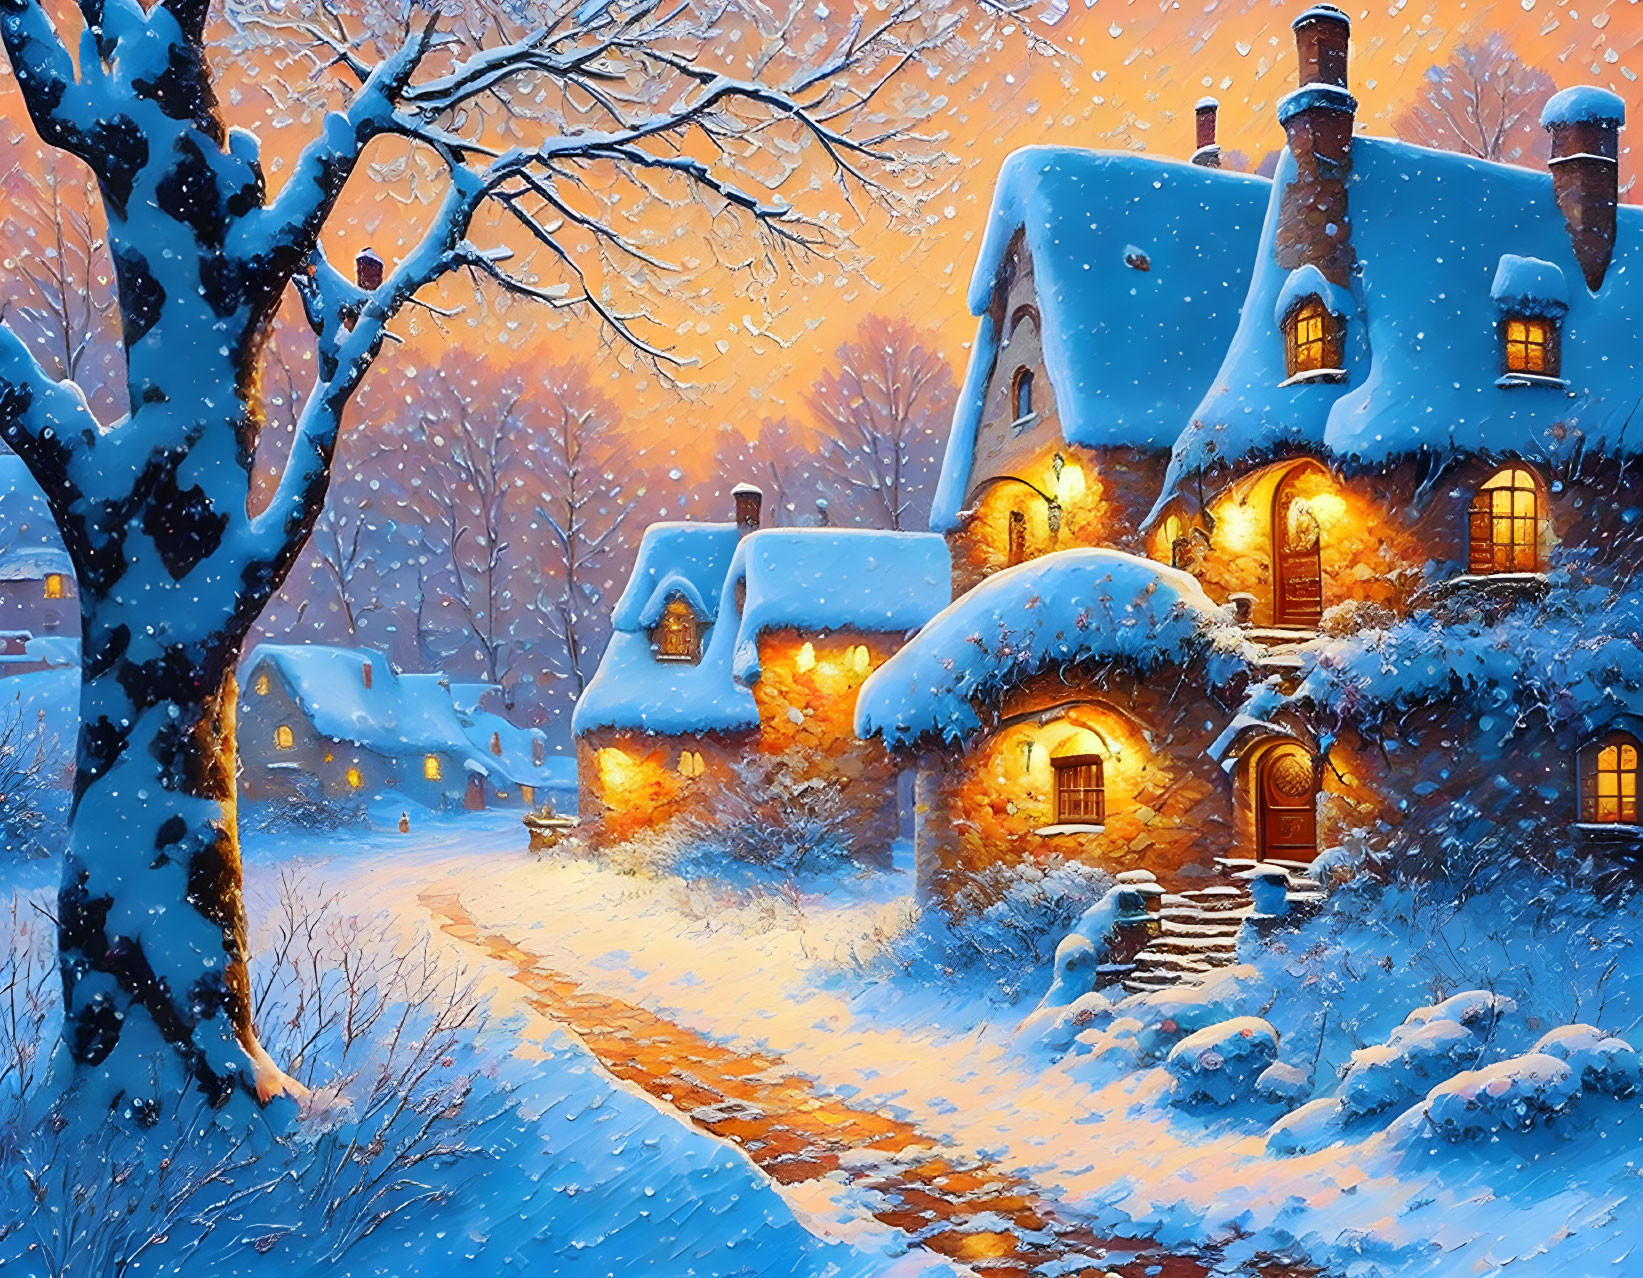 Snow-covered thatched-roof cottages in twilight winter scene with glowing windows and frosty trees